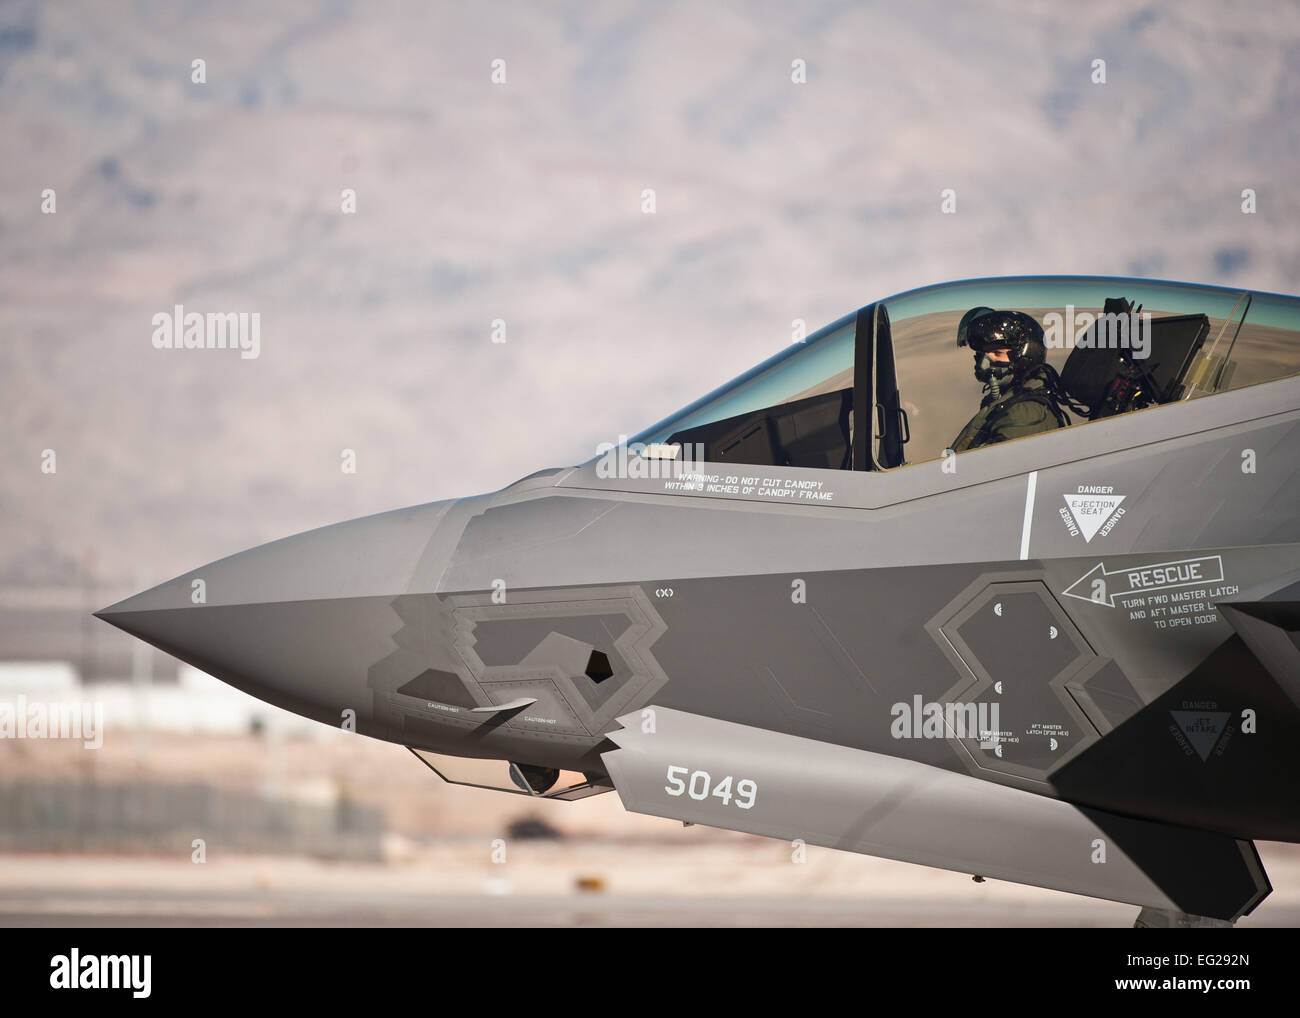 Capt. Brent Golden, 16th Weapons Squadron instructor, taxis an F-35A Lightning II at Nellis Air Force Base, Nev., Jan. 15, 2015. The F-35 Golden flew is the U.S. Air Force Weapons School’s first assigned F-35.  Staff Sgt. Siuta B. Ika &quot;For more photos from around the Air Force, visit our Facebook page at facebook.com/usairforce.&amp;quot  http://facebook.com/usairforce.&amp;quot  ; United States Air Force Stock Photo